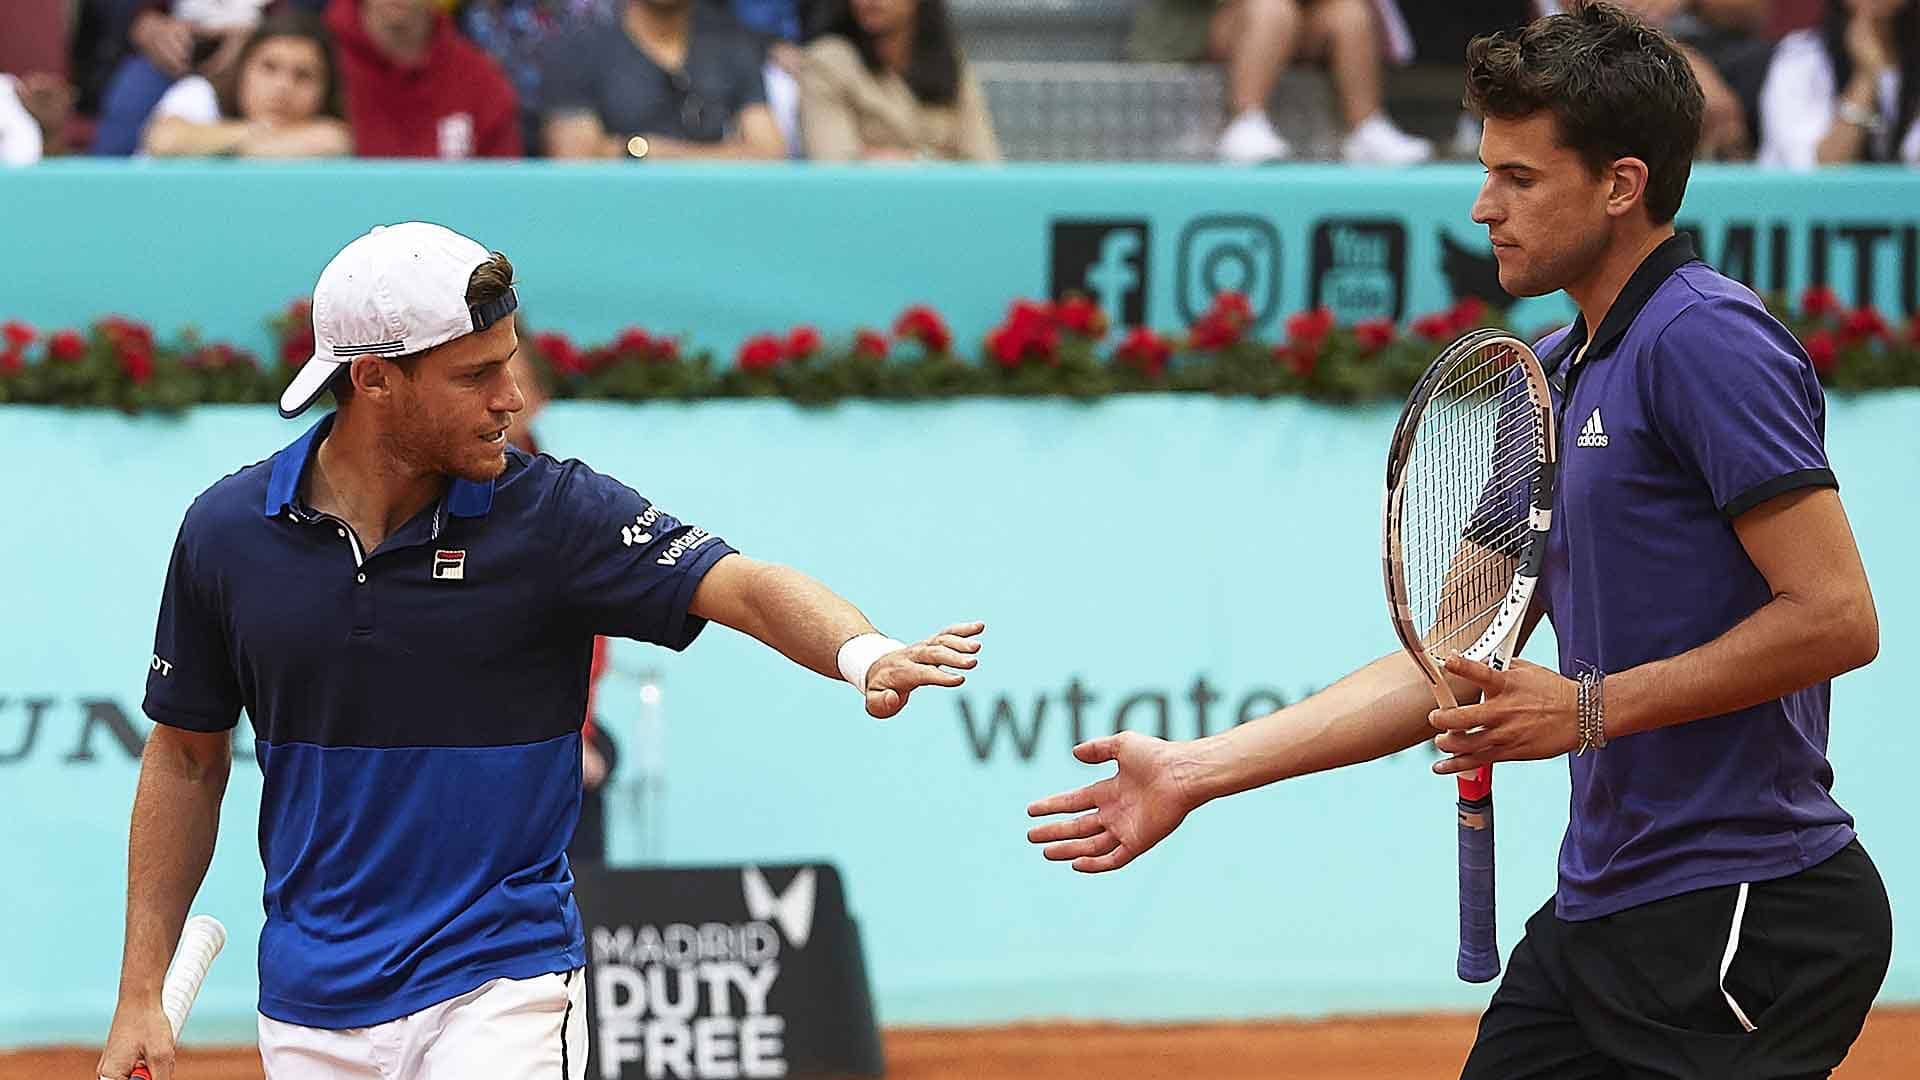 Diego Schwartzman and Dominic Thiem advance to their second tour-level final of the season at the Mutua Madrid Open.